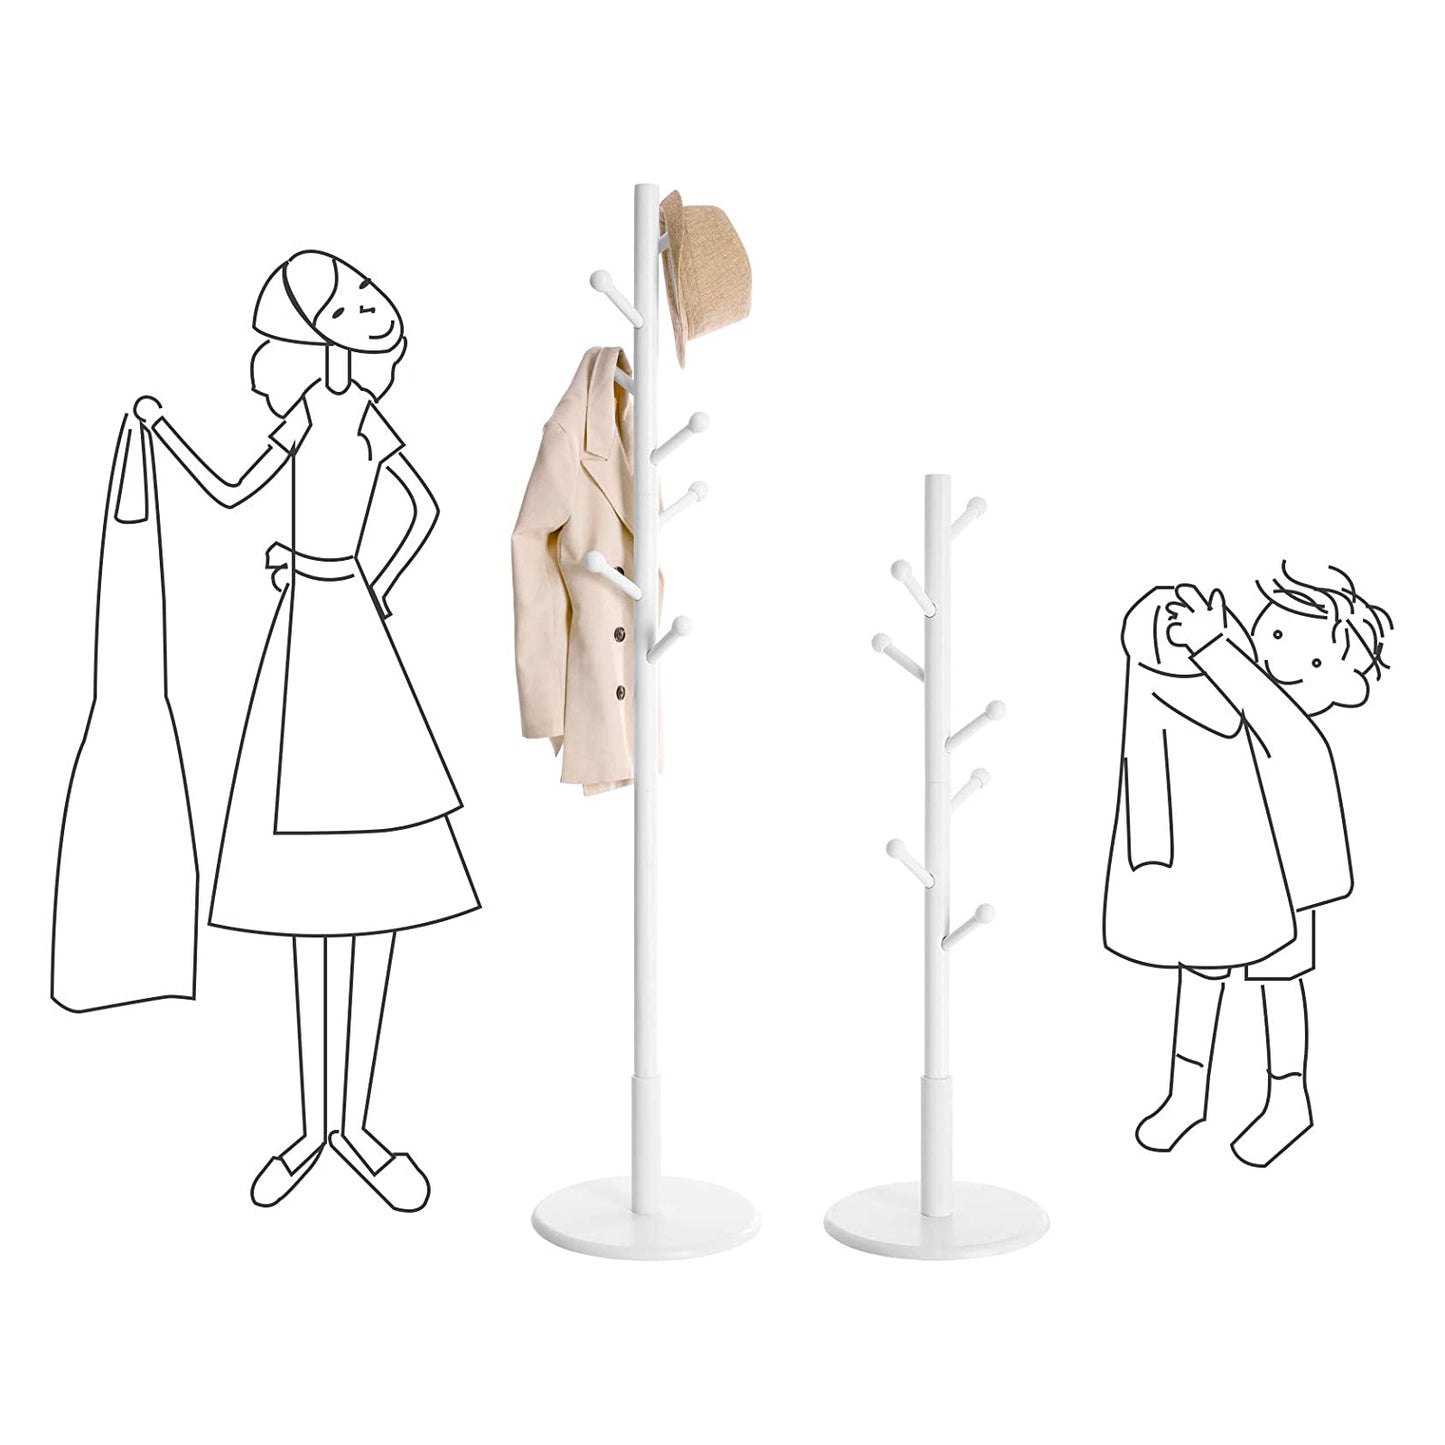 Coat Rack Free Standing Coat Tree with 7 Rounded Hooks, Wood Hall Tree, Entryway Coat Stand for Clothes, Hats, Purses